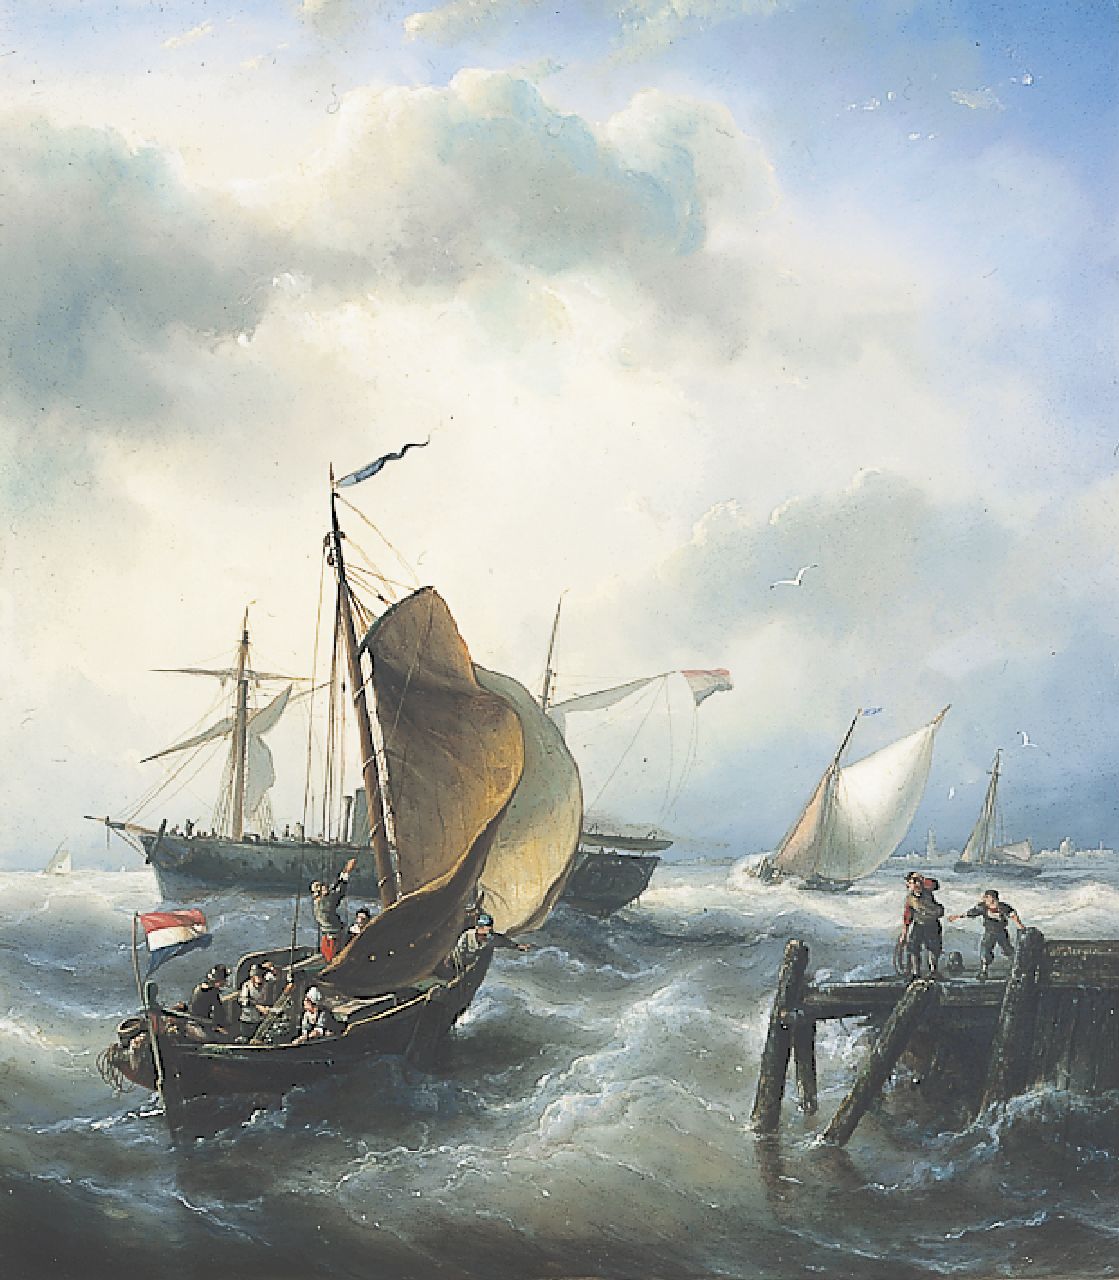 Riegen N.  | Nicolaas Riegen, Navigating the ships, oil on panel 48.1 x 42.4 cm, signed l.r. and dated 1866